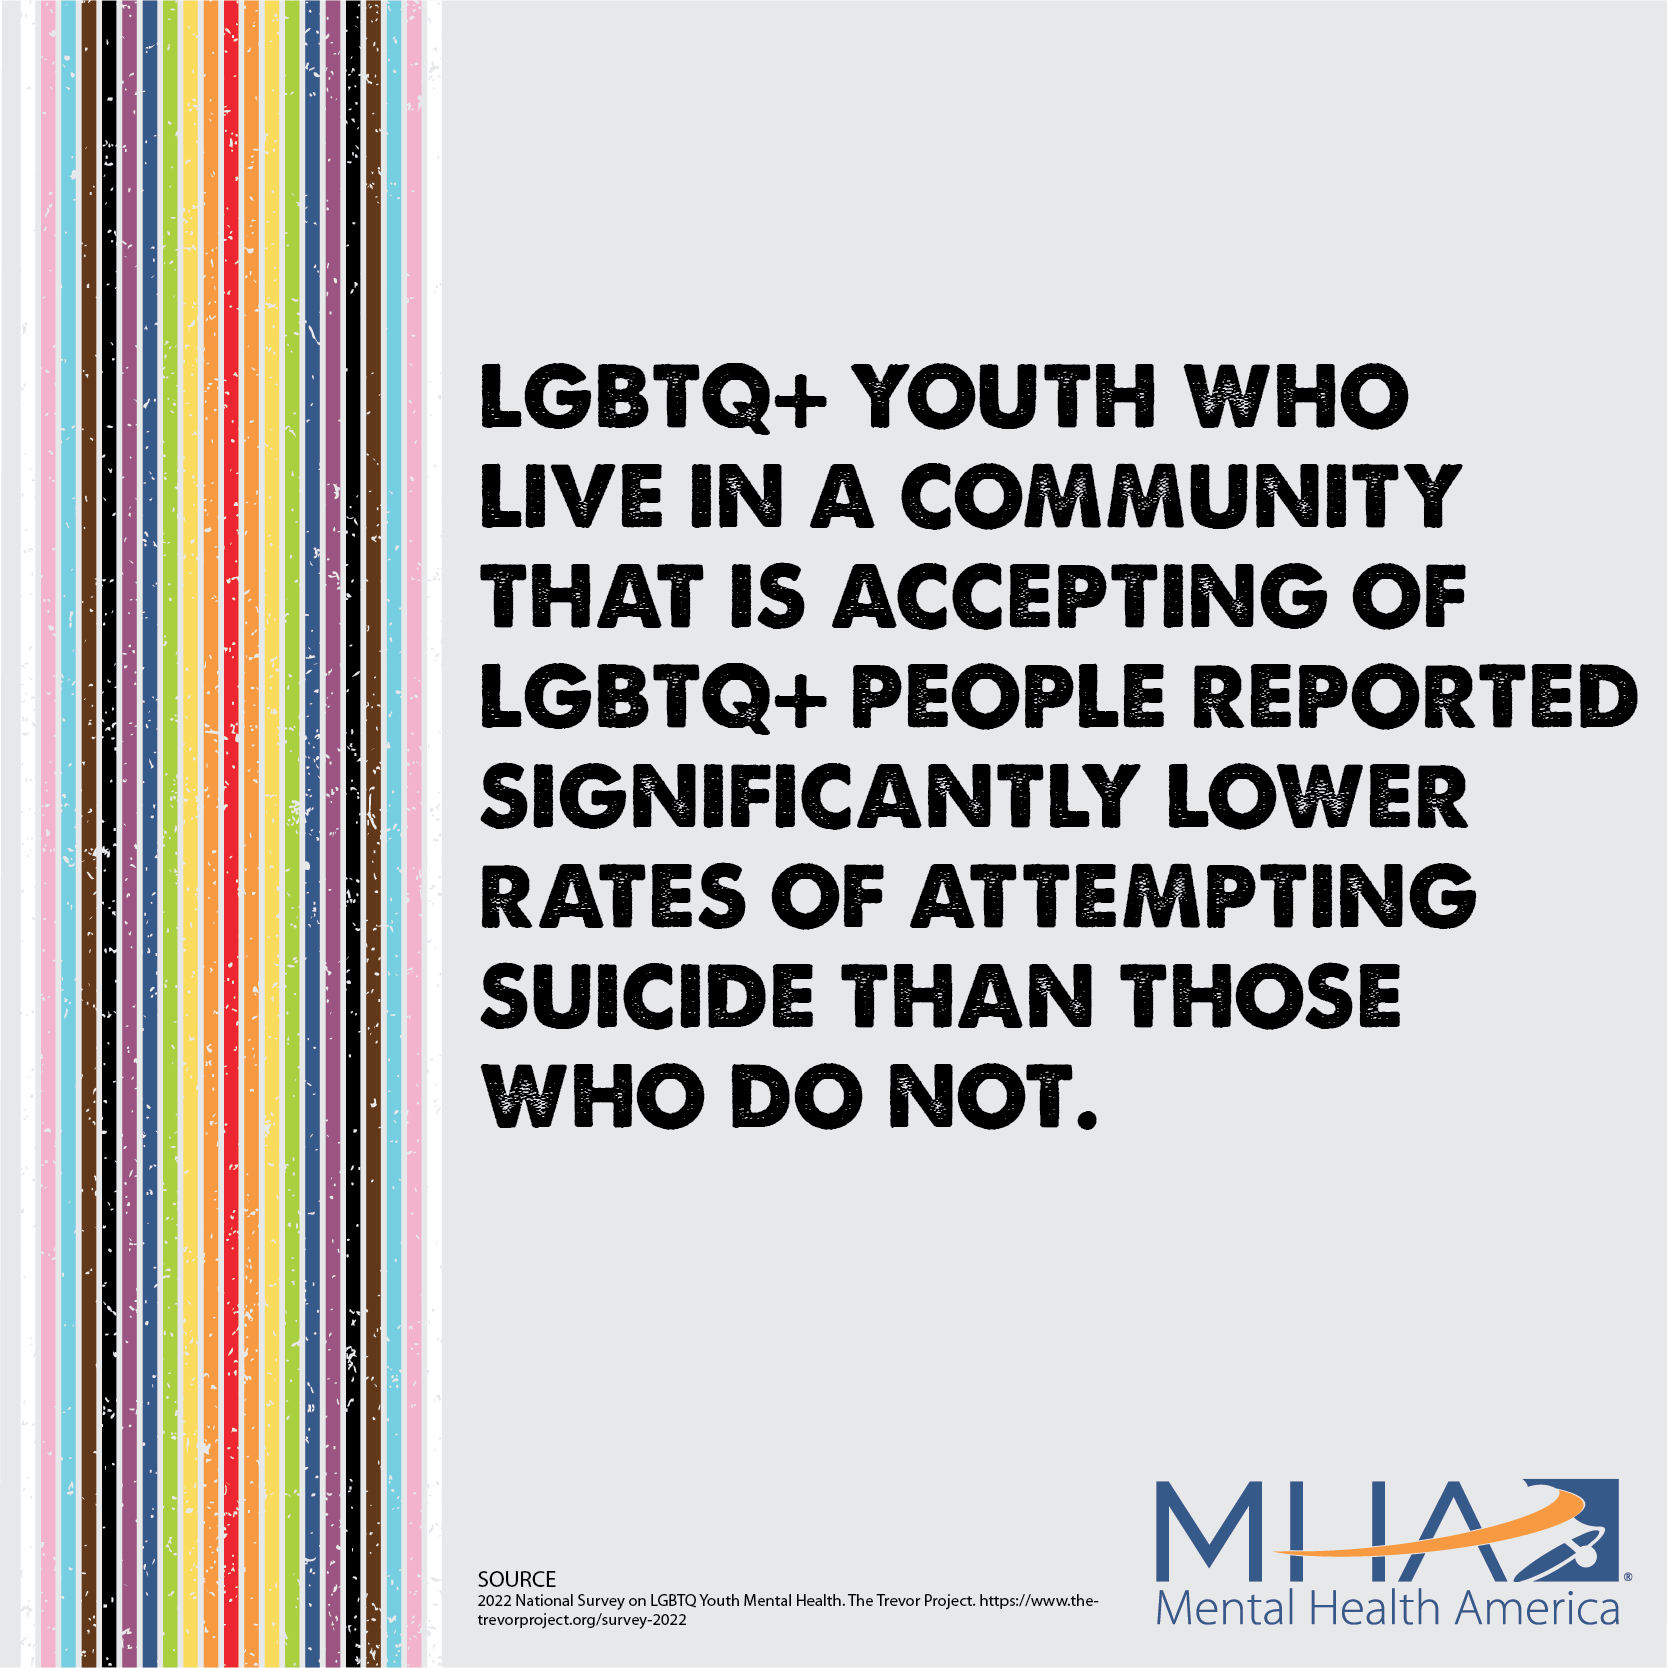 LGBTQ+ youth who live in a community that is accepting of LGBTQ+ people reported significantly lower rates of attempting suicide than those who do not.